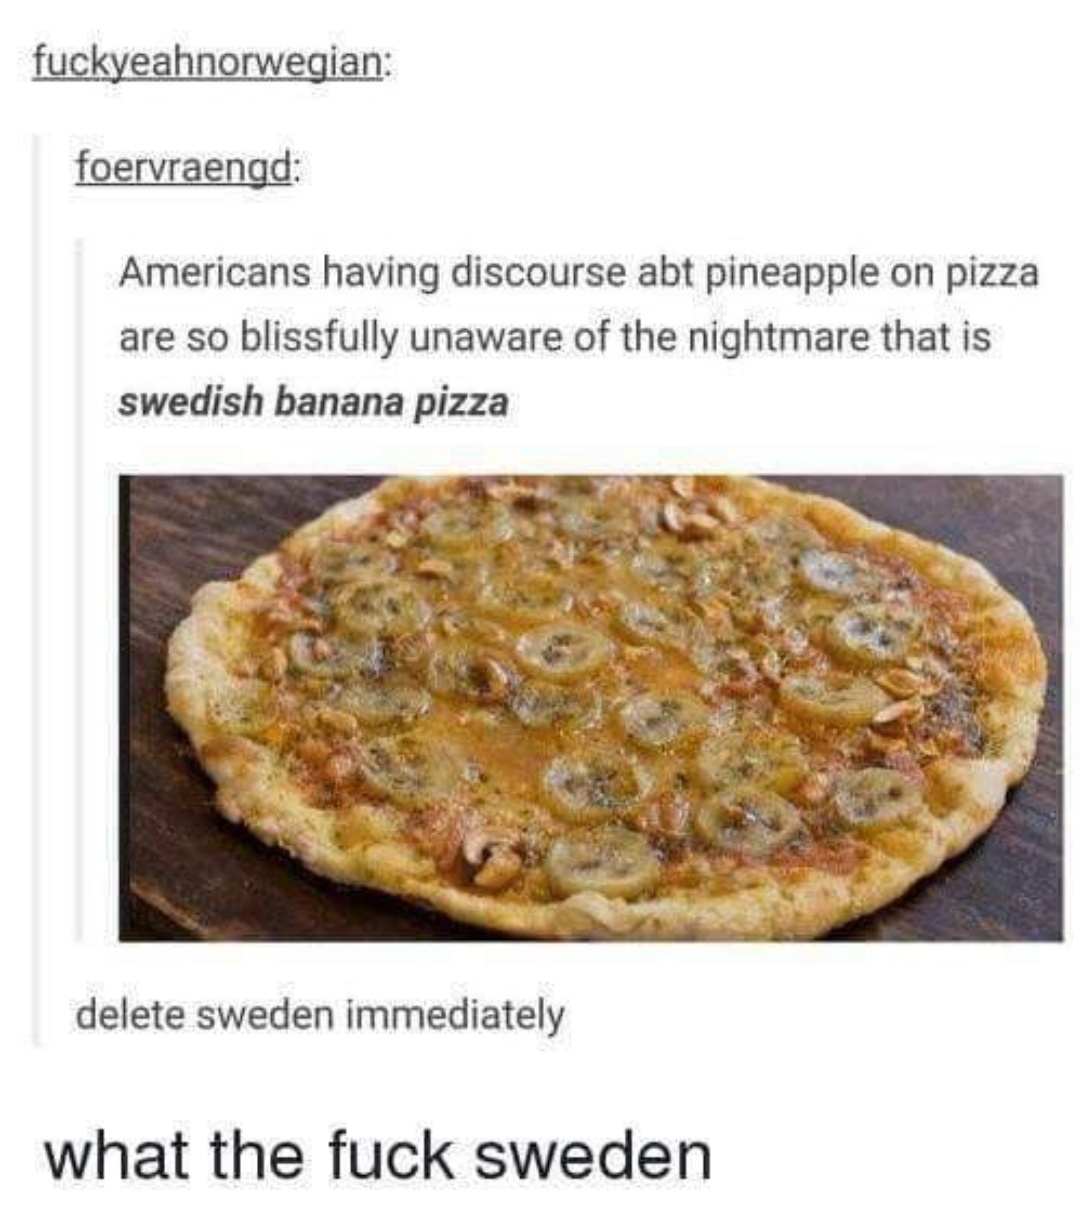 swedish banana pizza - fuckyeahnorwegian foervraengd Americans having discourse abt pineapple on pizza are so blissfully unaware of the nightmare that is swedish banana pizza delete sweden immediately what the fuck sweden